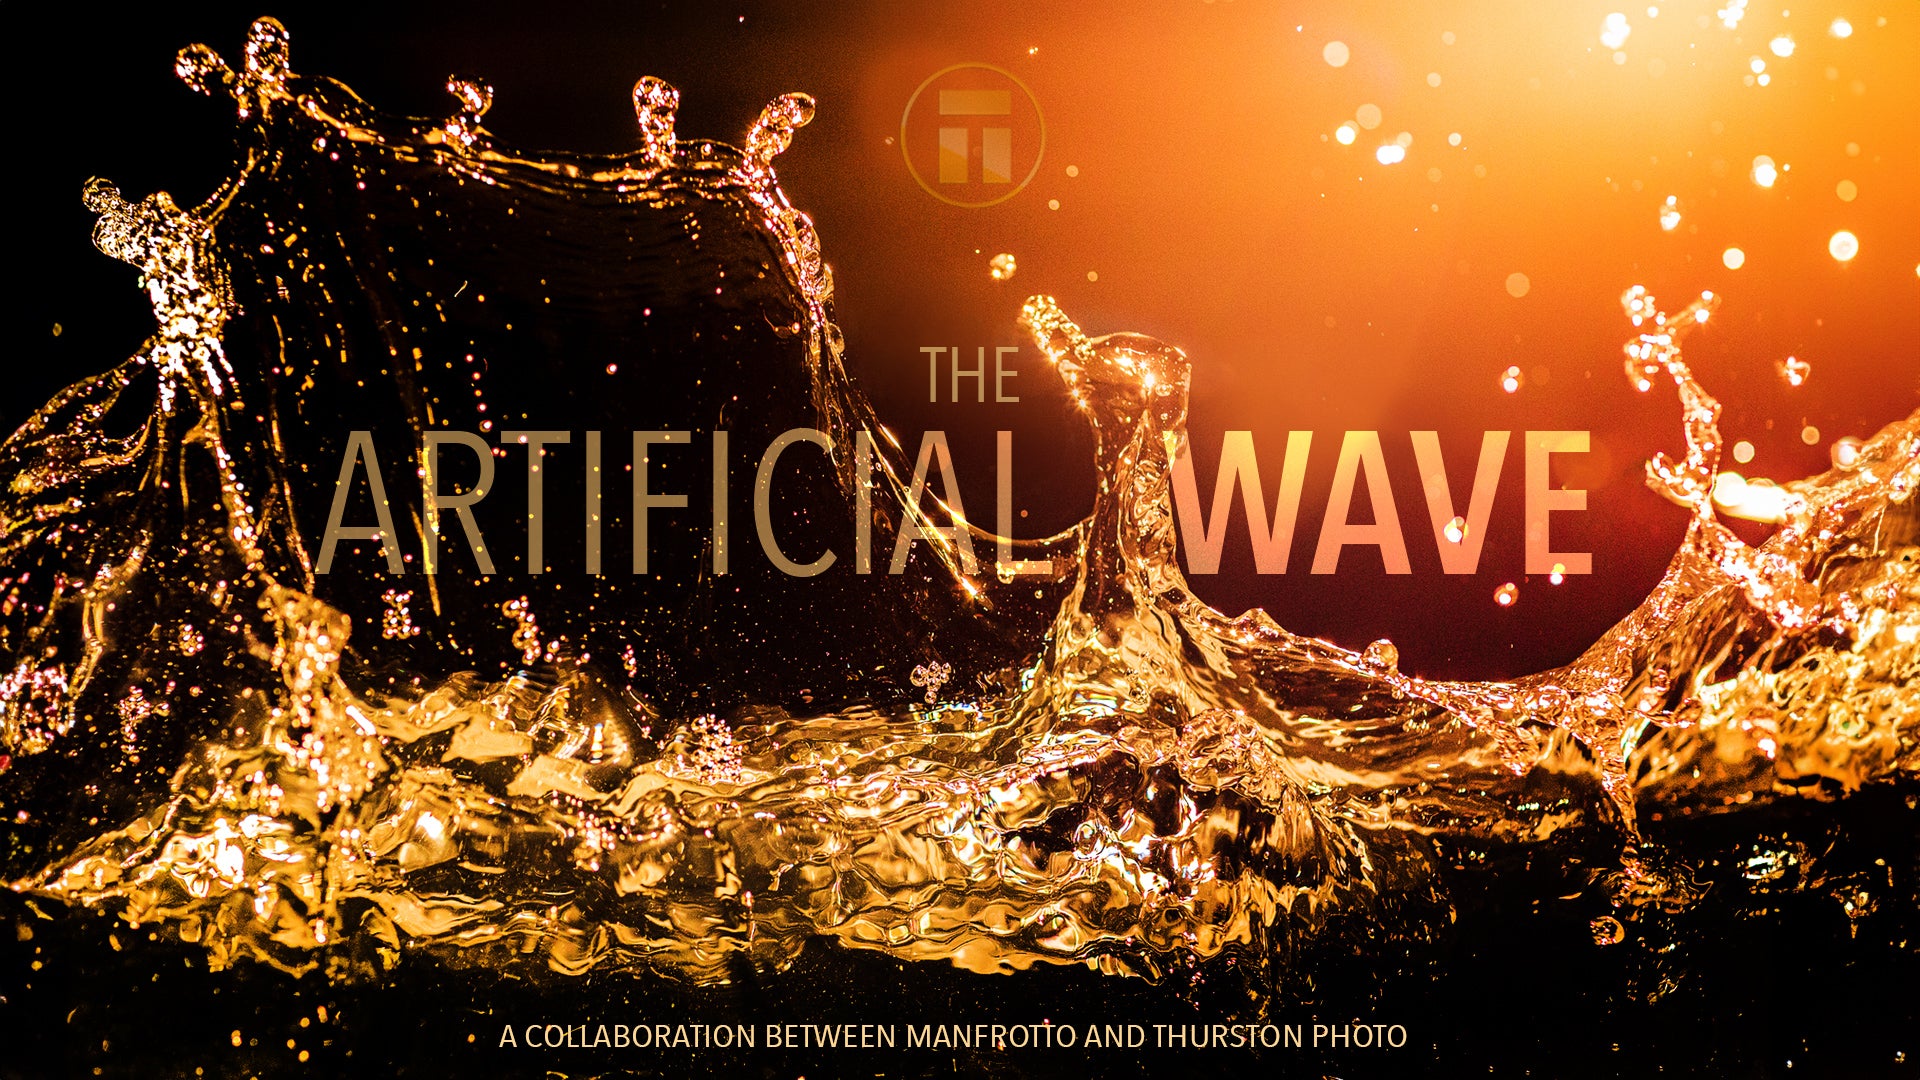 The ARTificial Wave - Building Your Vision